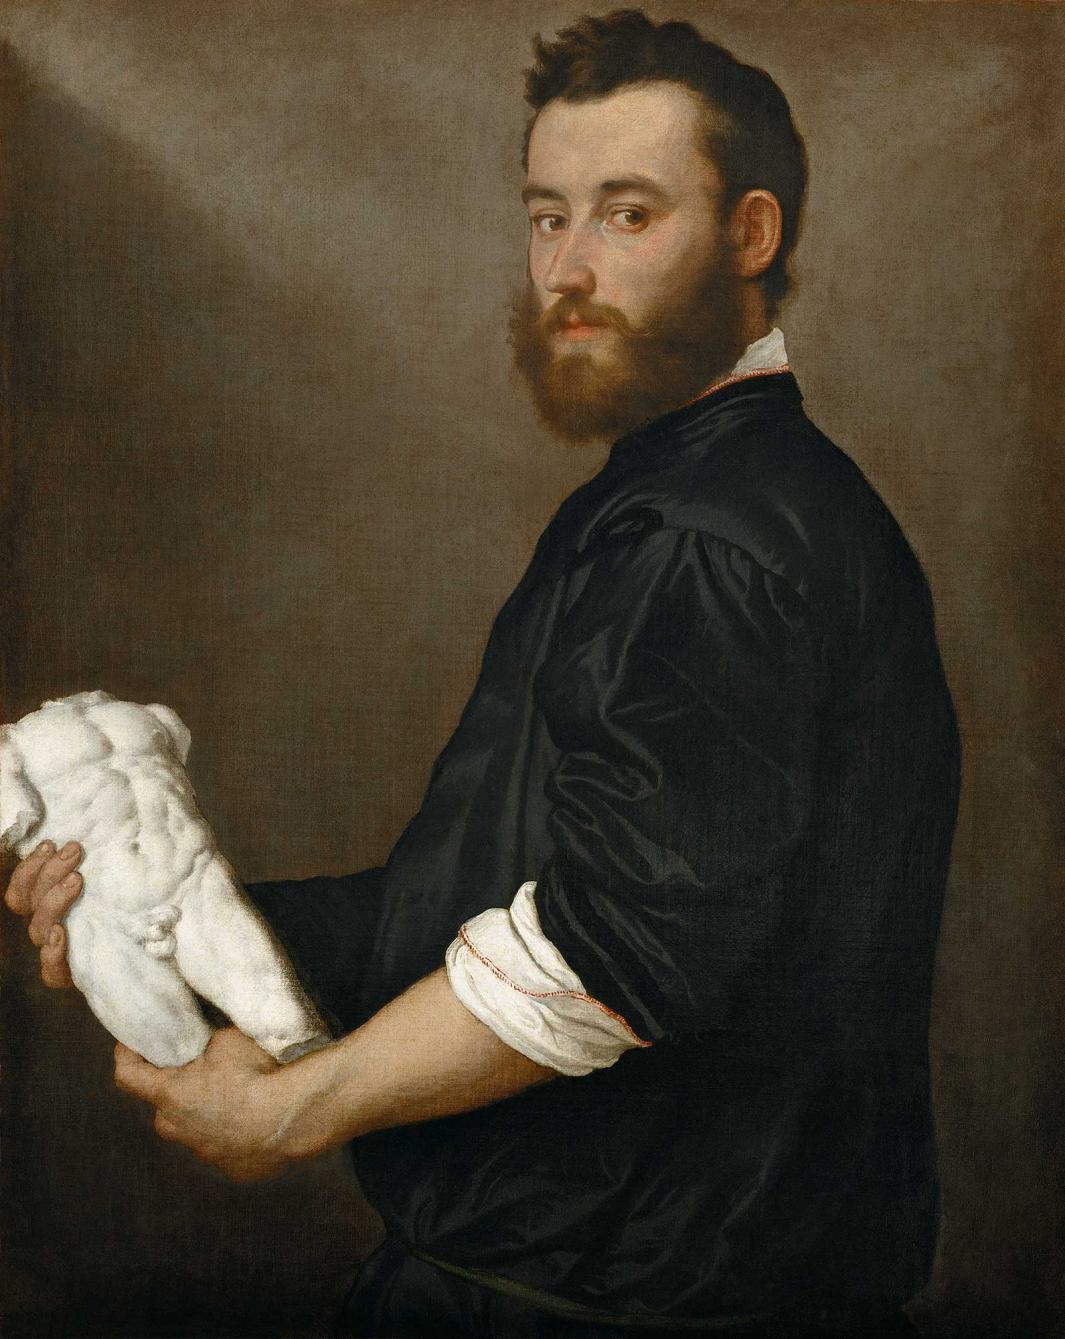 oil painting of bearded young man wearing black garment. In his hands he holds a sculpture of a nude male torso.